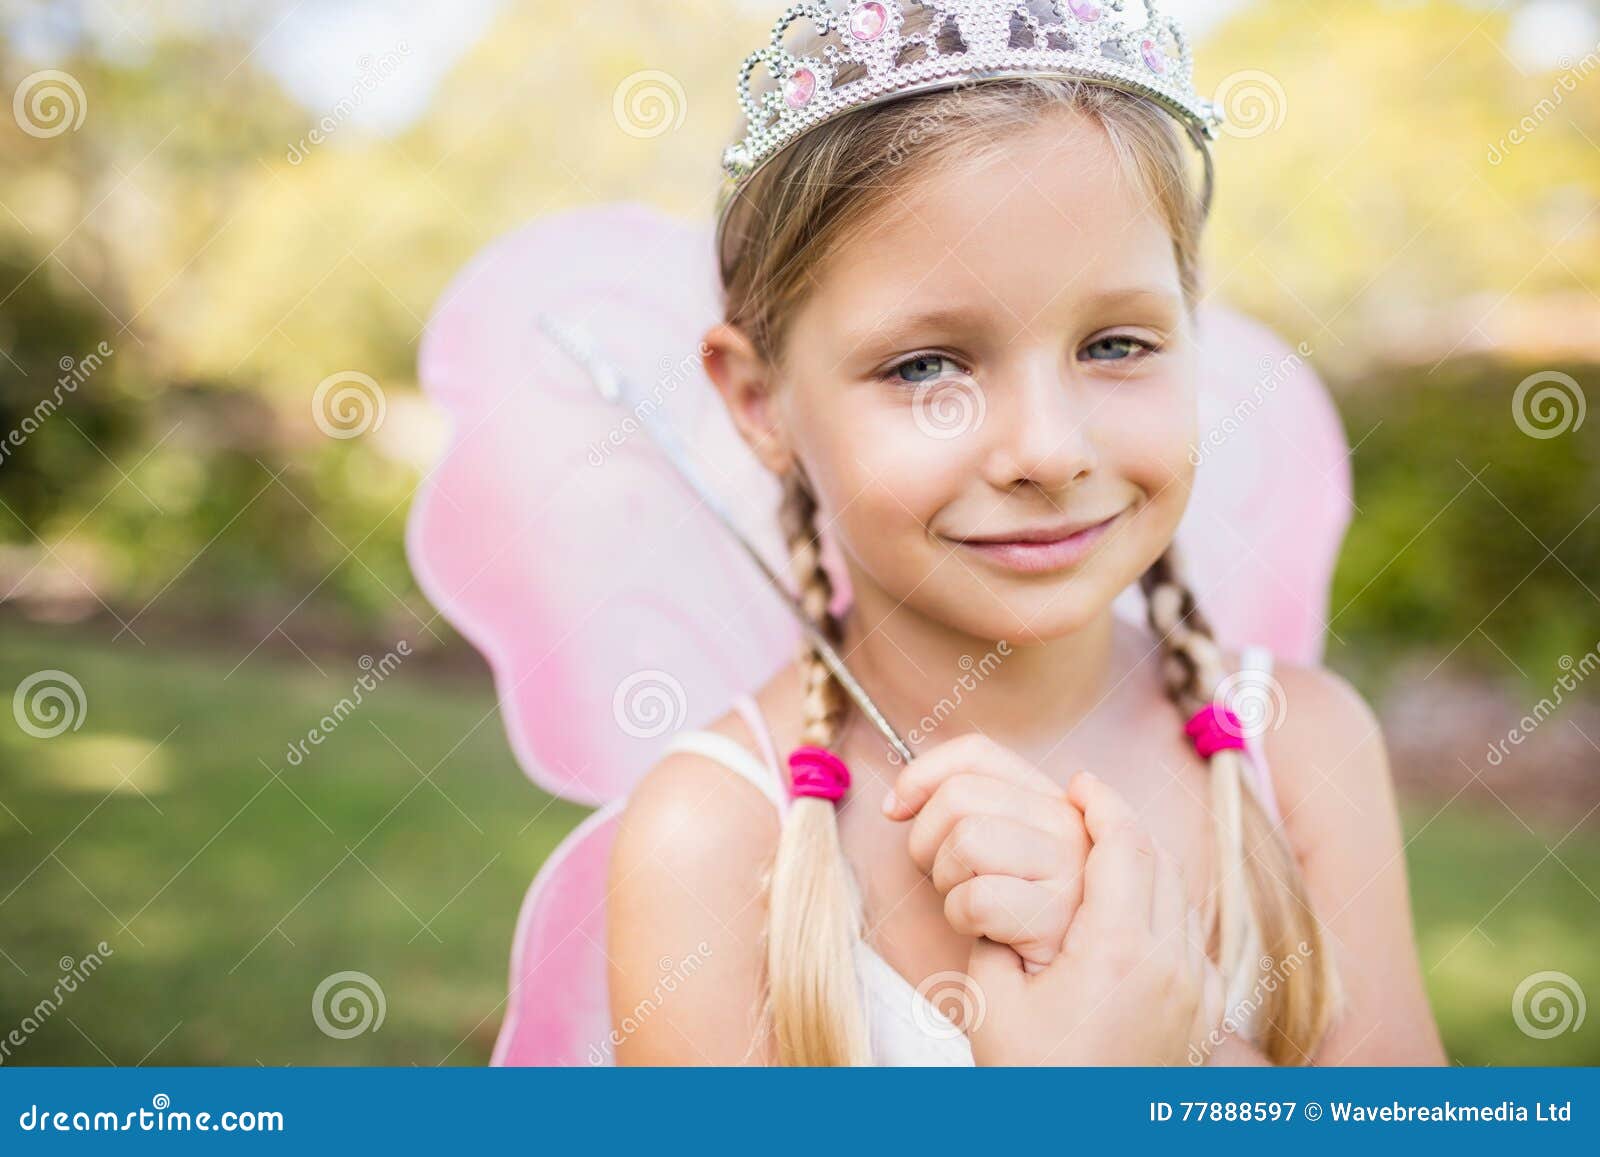 Portrait of Cute Girl Pretending To Be a Princess Stock Image - Image ...